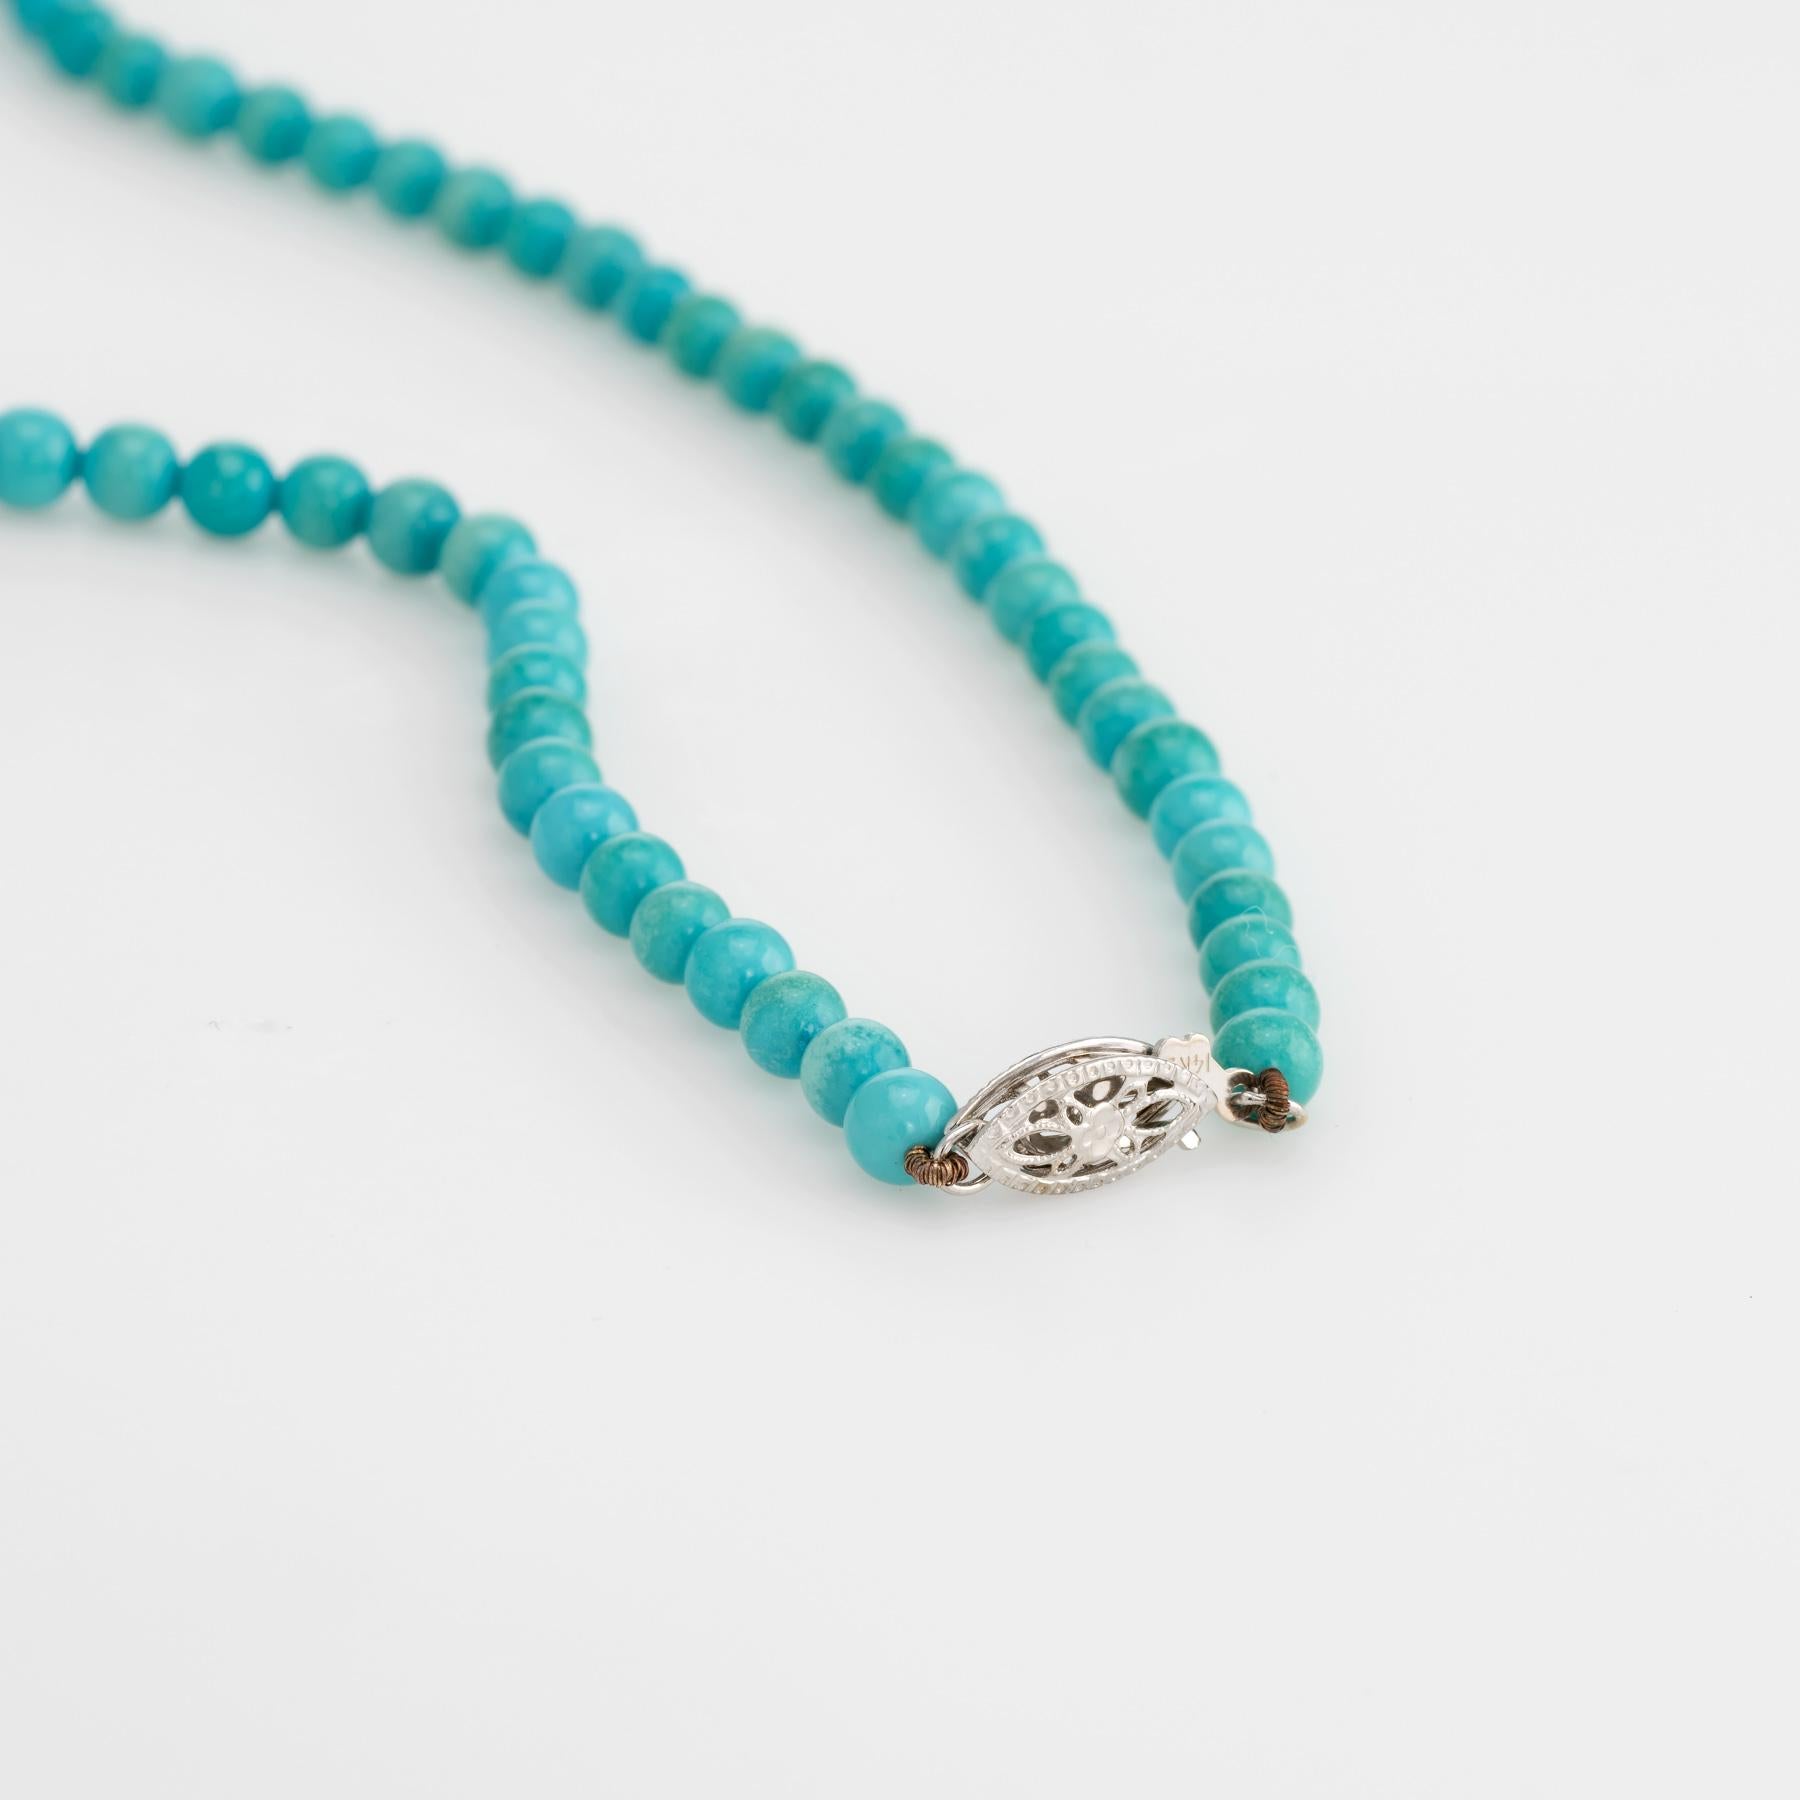 Modern Vintage Turquoise Bead Necklace Diamond Drop 14k White Gold Choker Jewelry For Sale